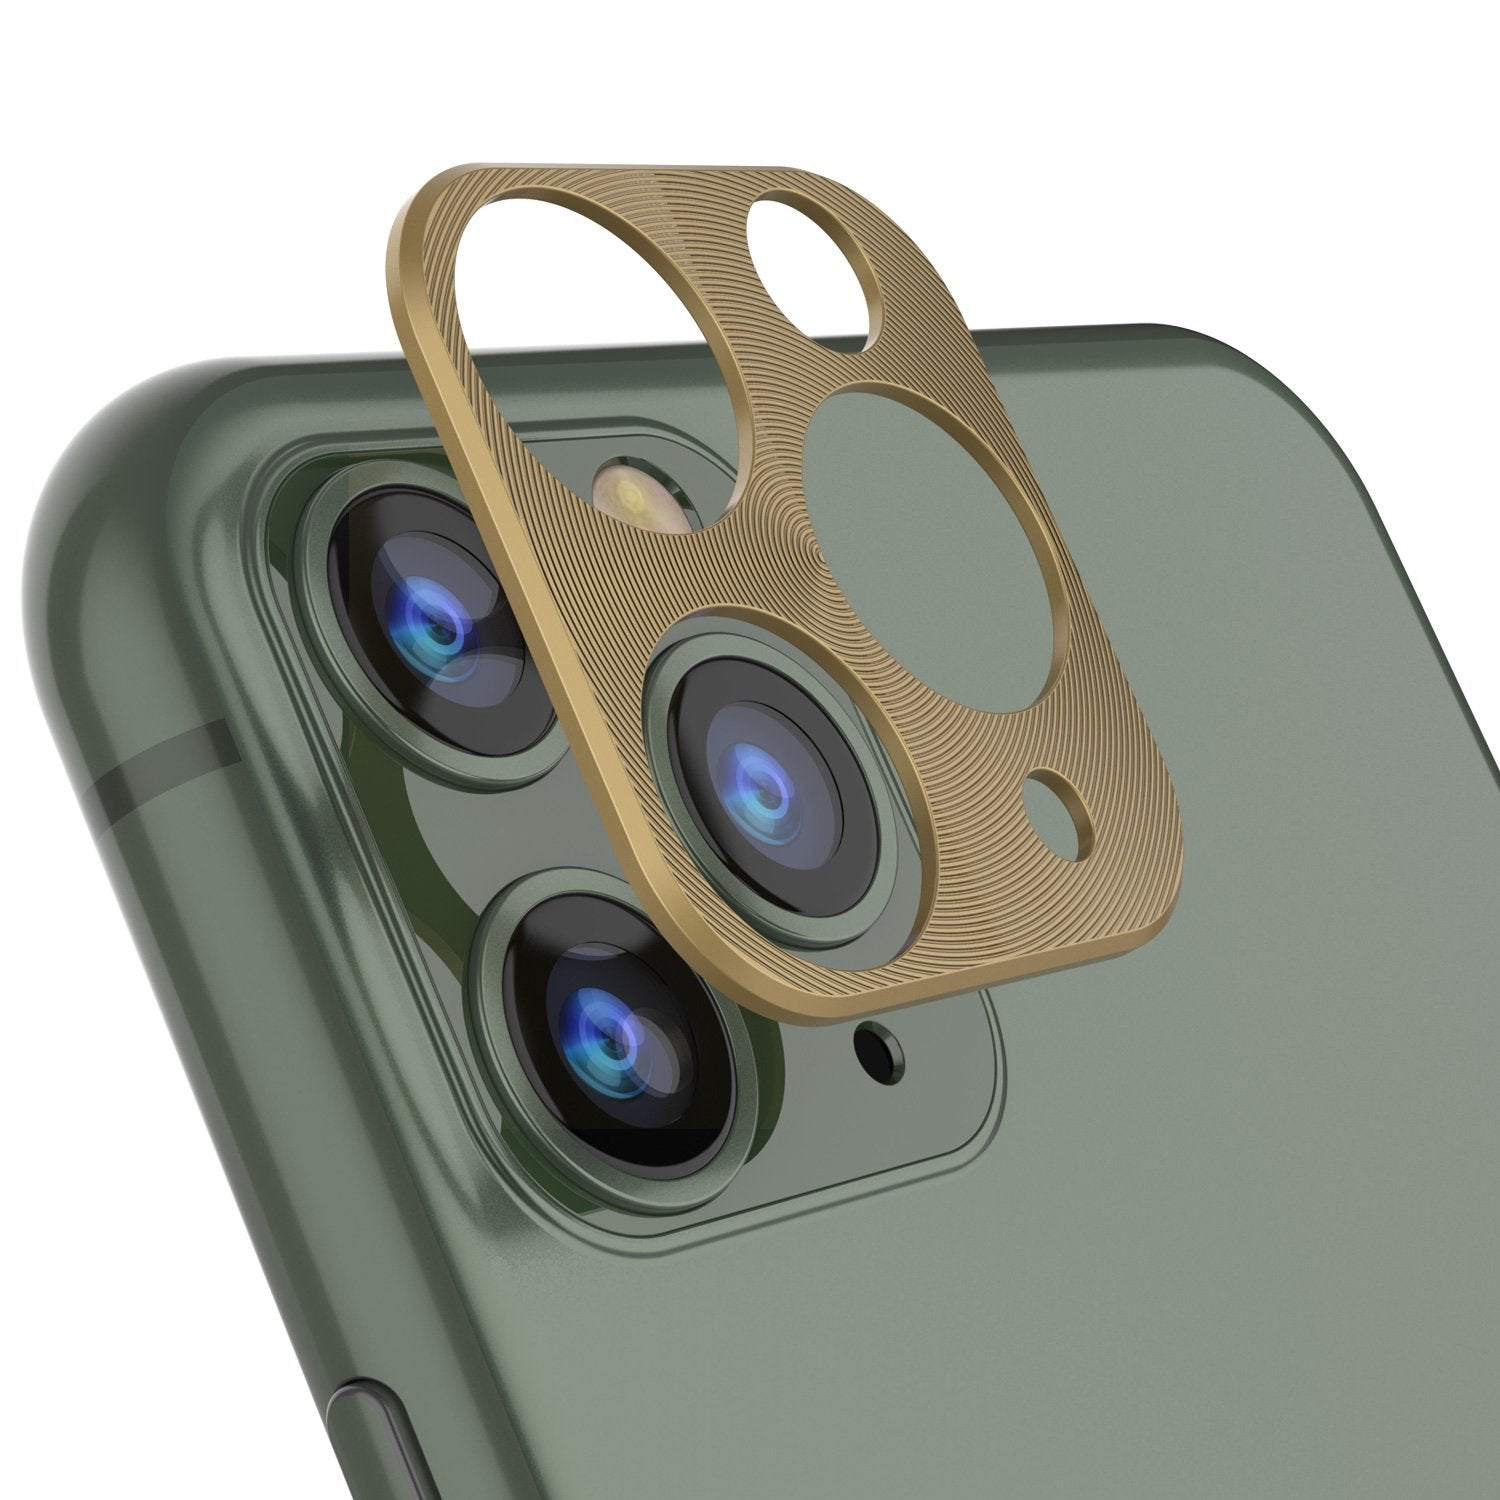 Punkcase iPhone 11 Pro Camera Protector Ring [Gold]